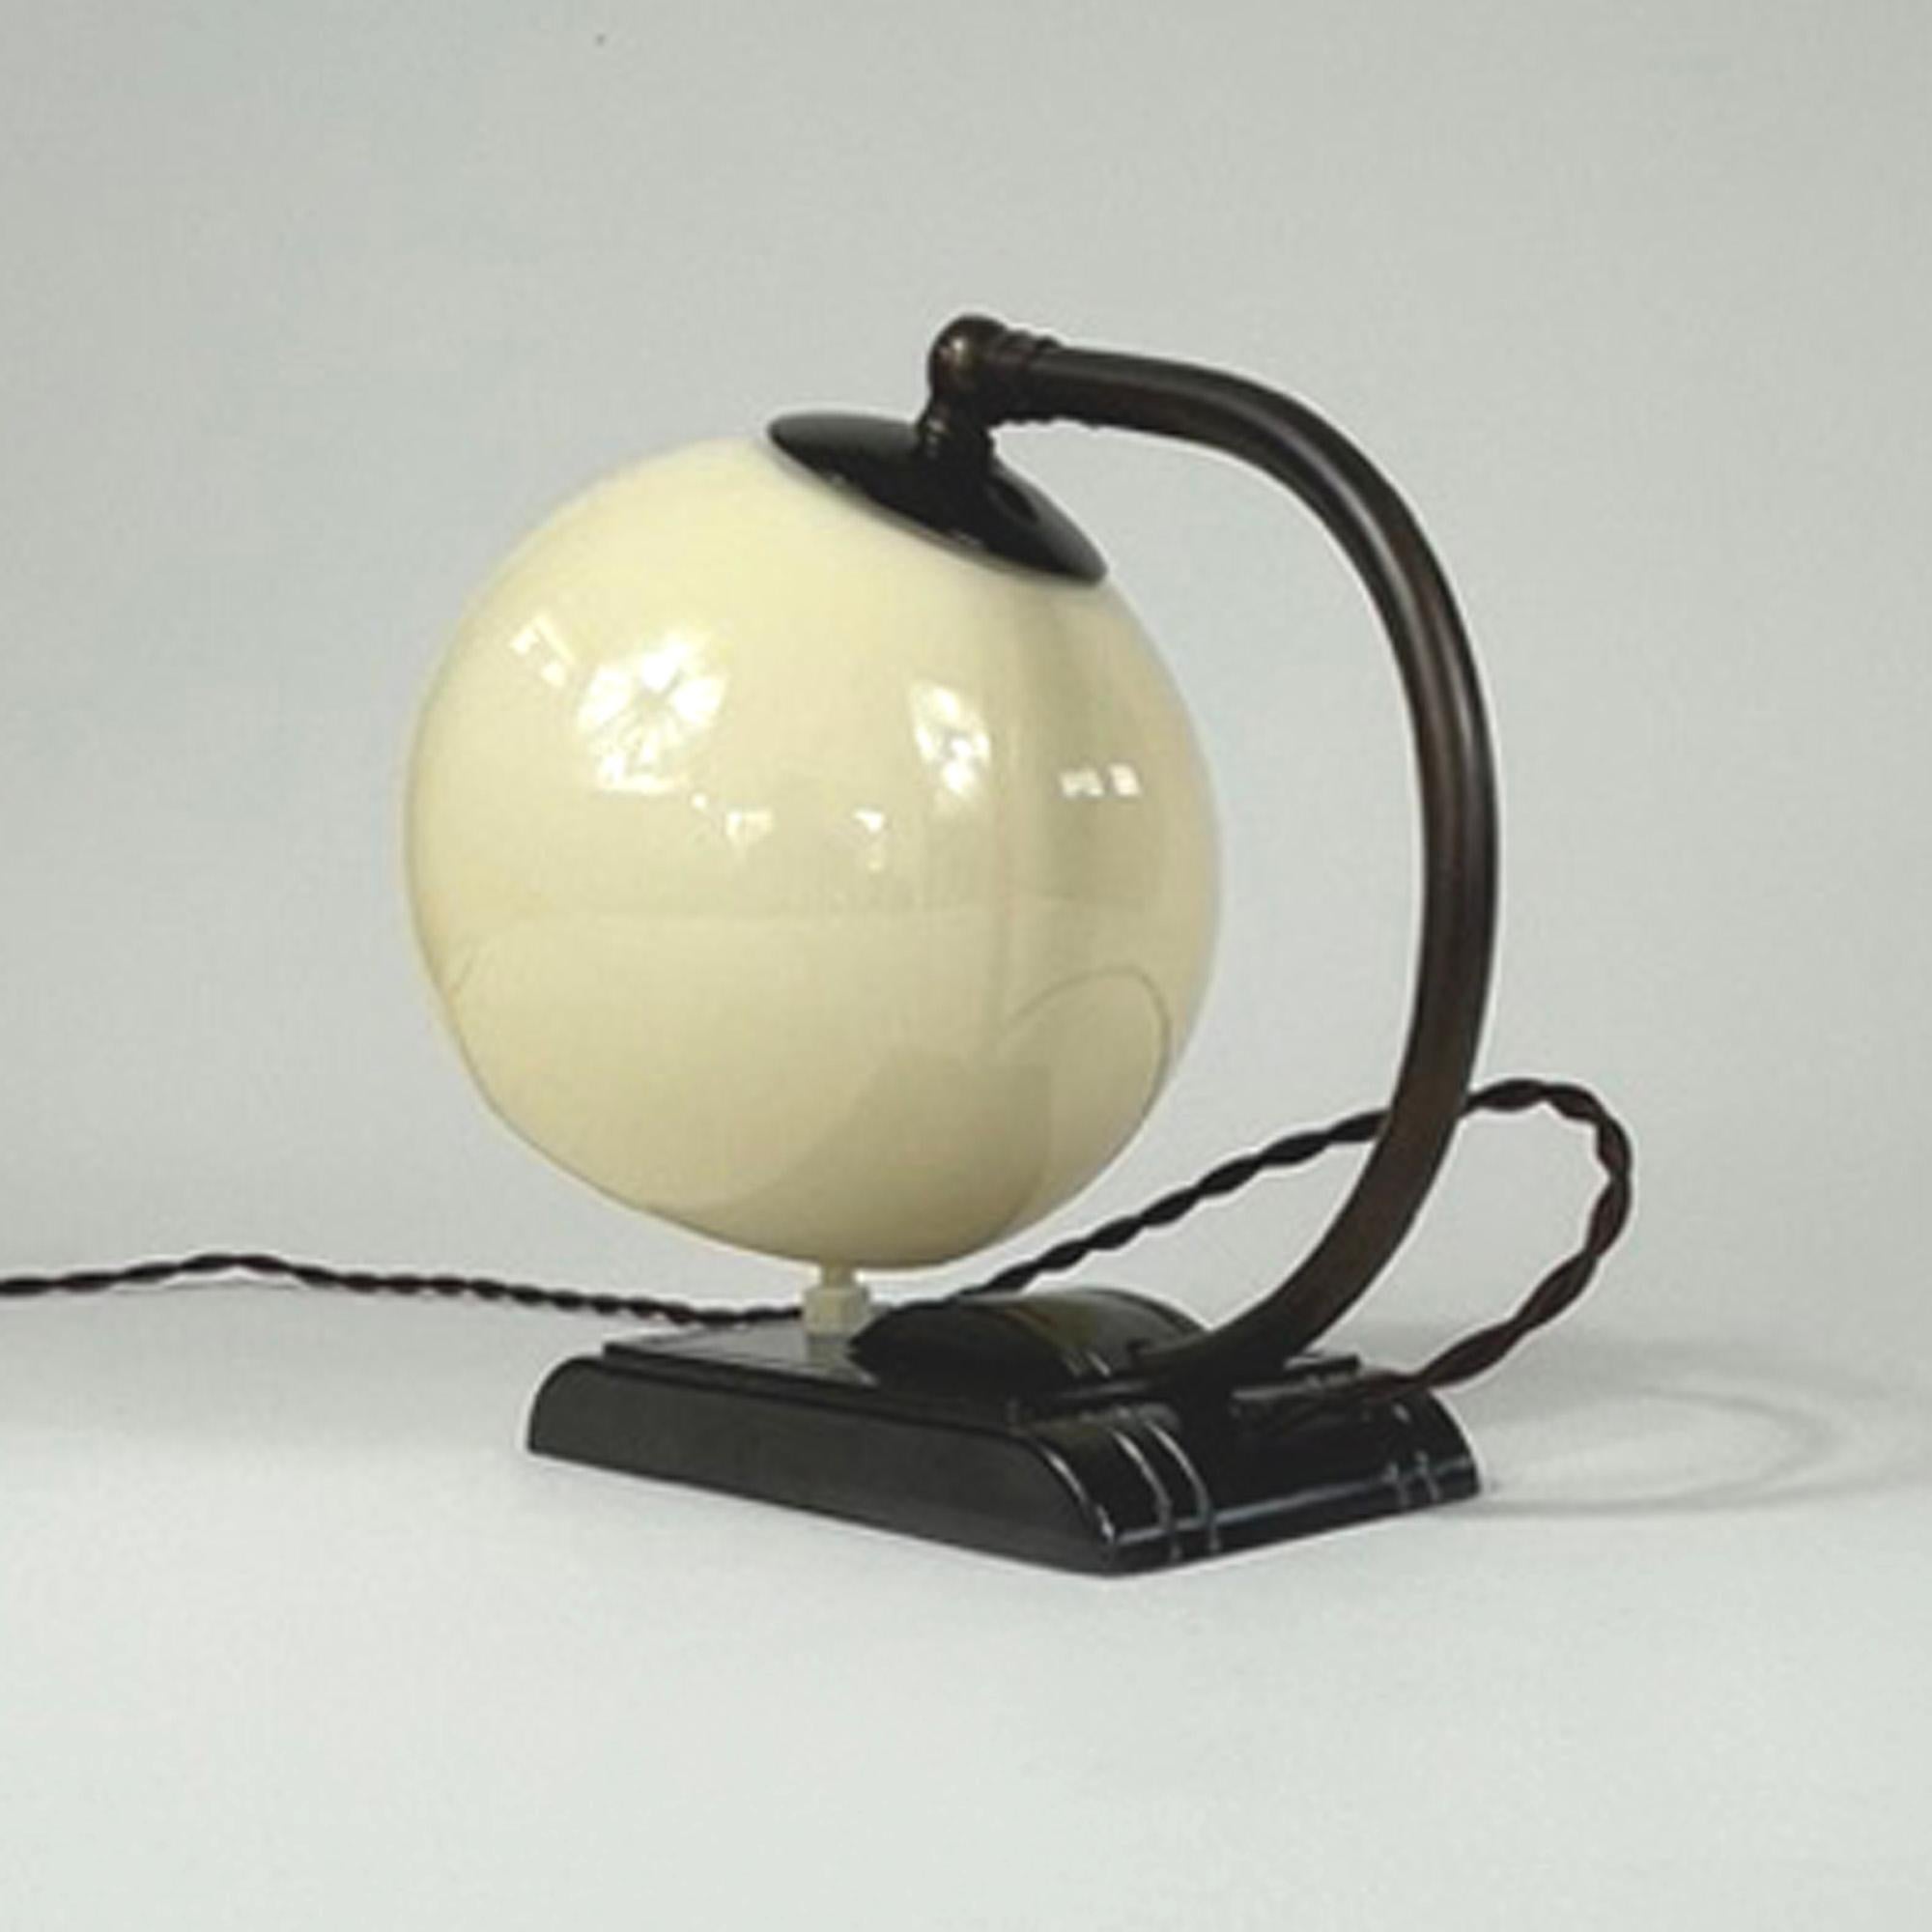 Art Deco Streamline Design Bakelite and Opaline Table Lamp, 1920s to 1930s For Sale 10